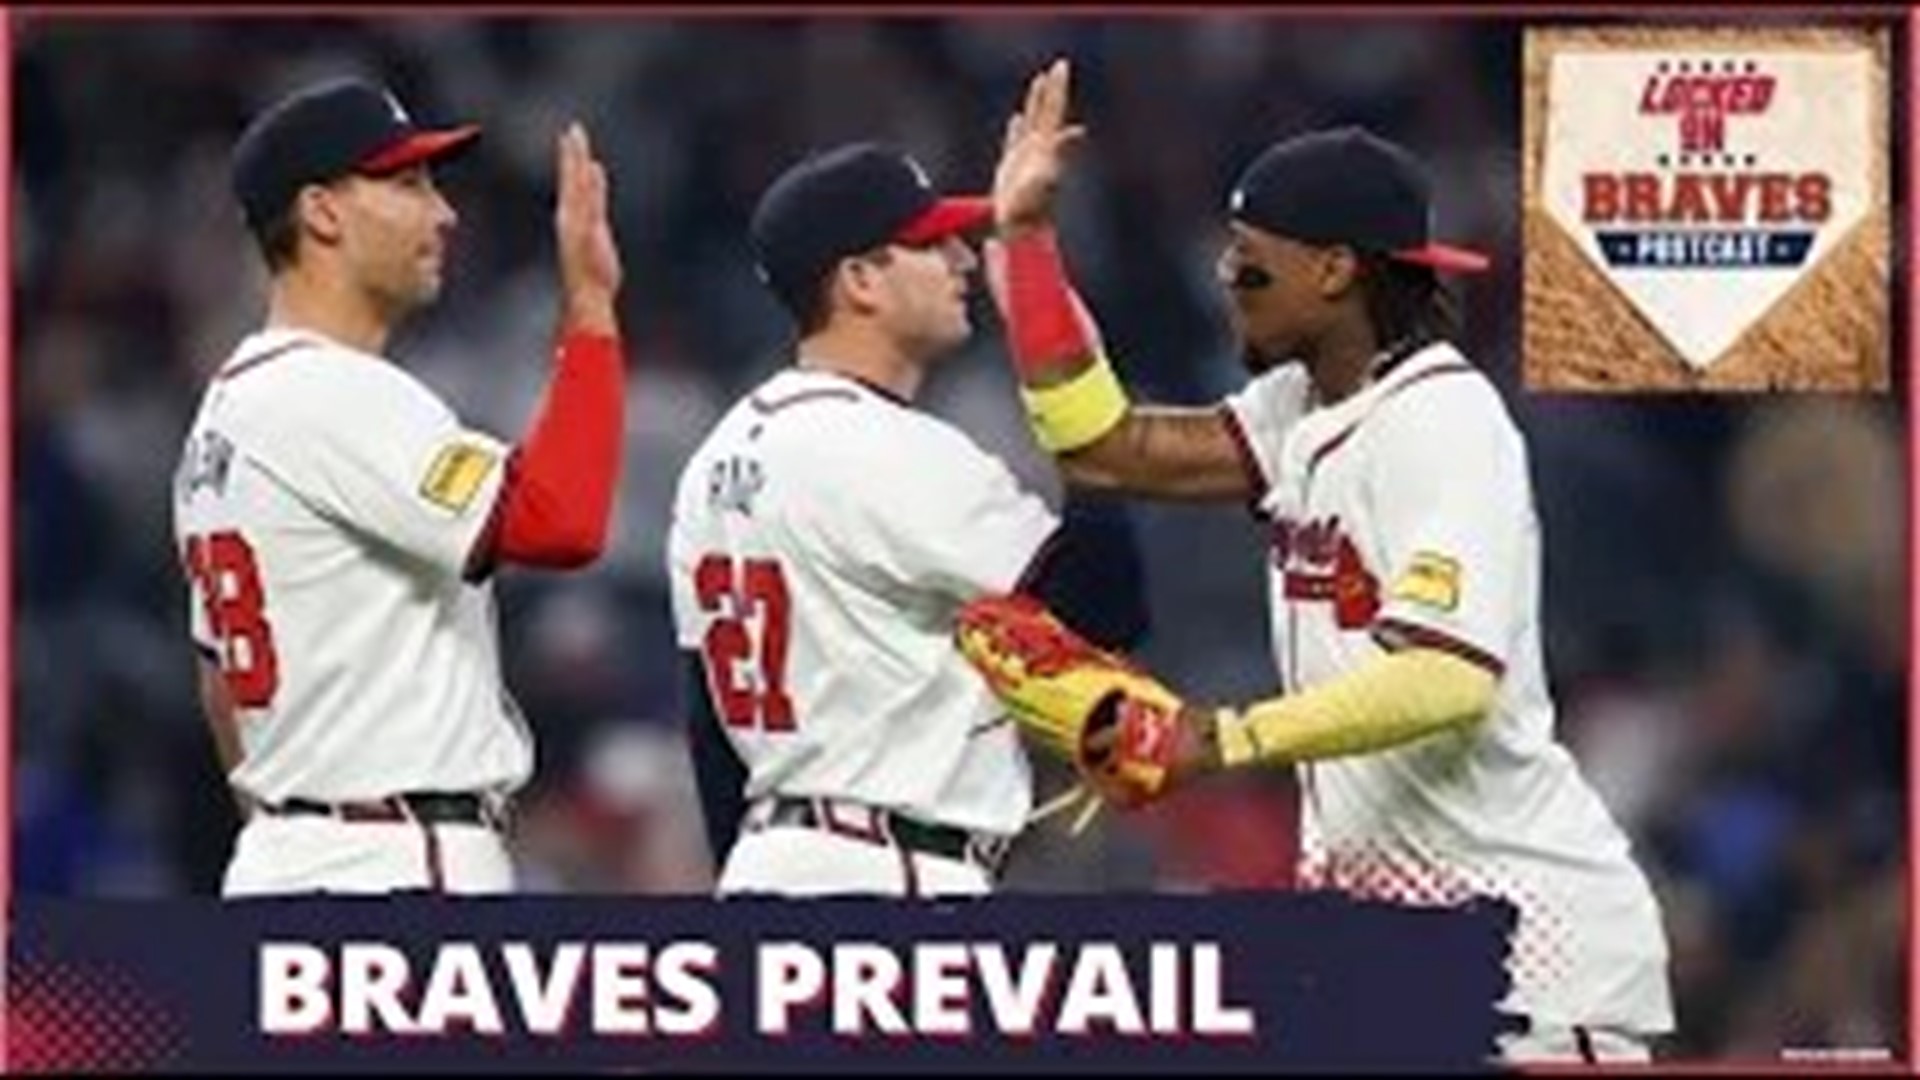 The Atlanta Braves weathered a late comeback attempt by the New York Mets and some rainy conditions to claim a 6-5 win at Truist Park on Tuesday.